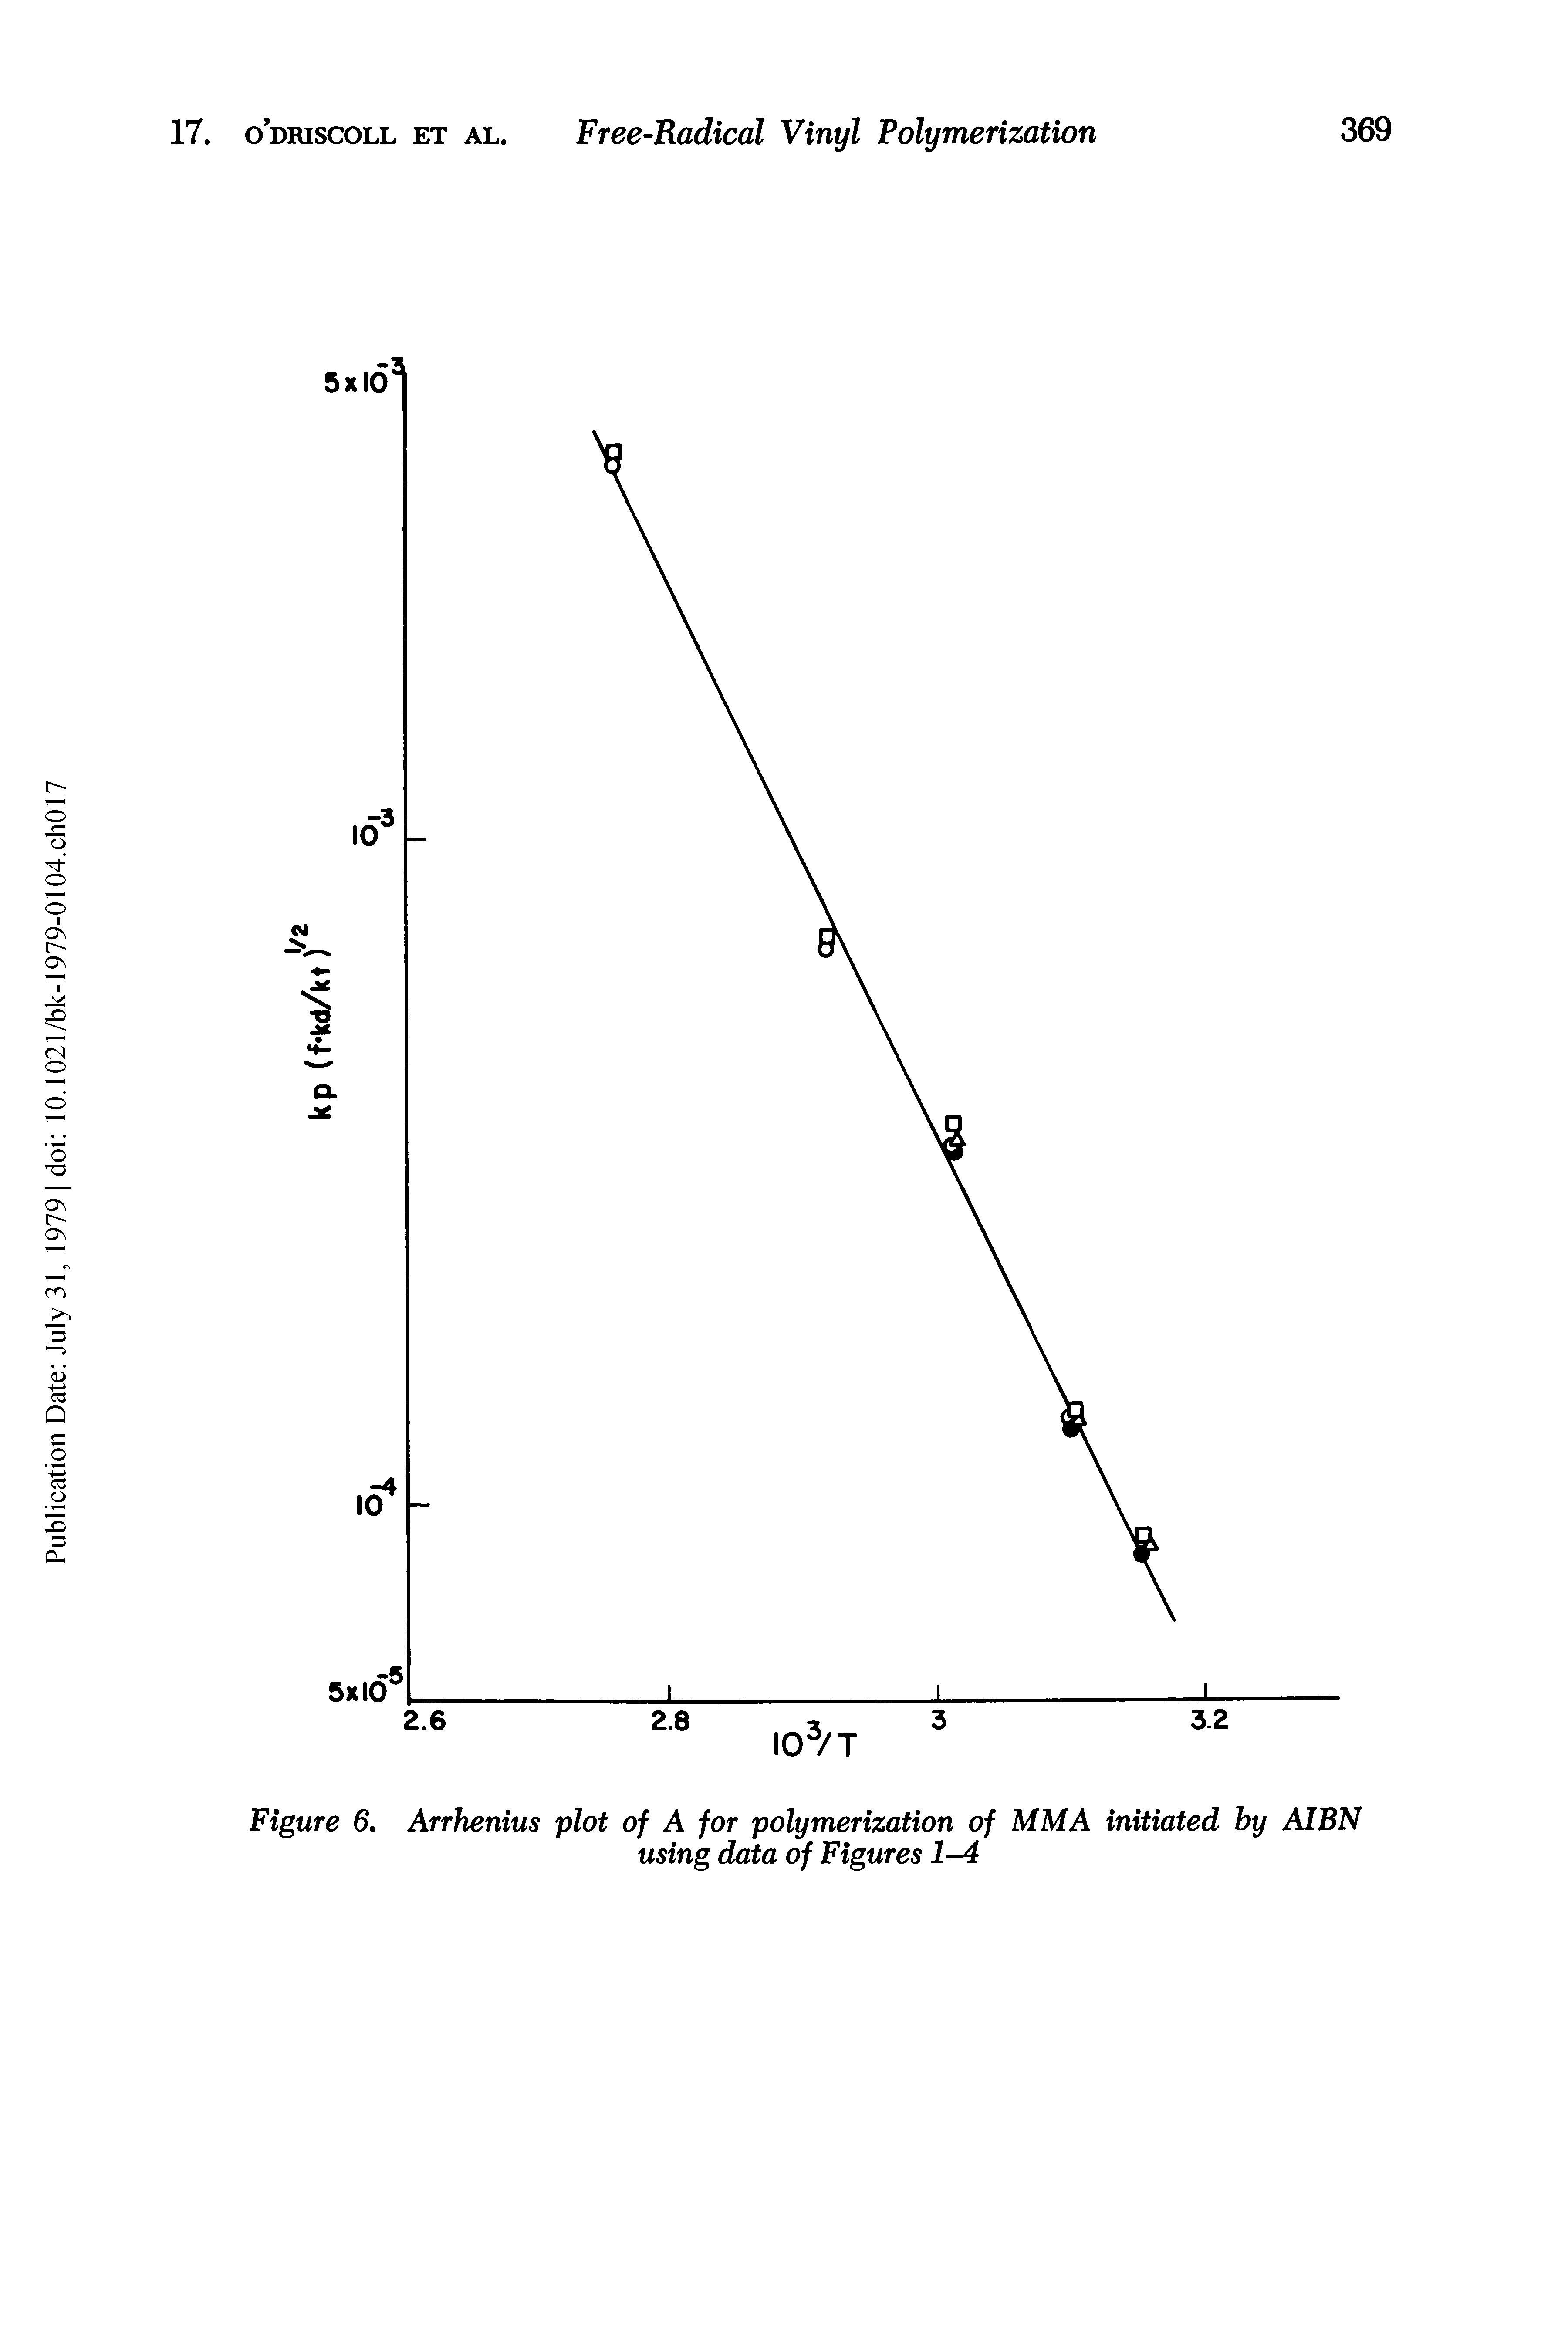 Figure 6, Arrhenius plot of A for polymerization of MM A initiated by AIBN using data of Figures 1-4...